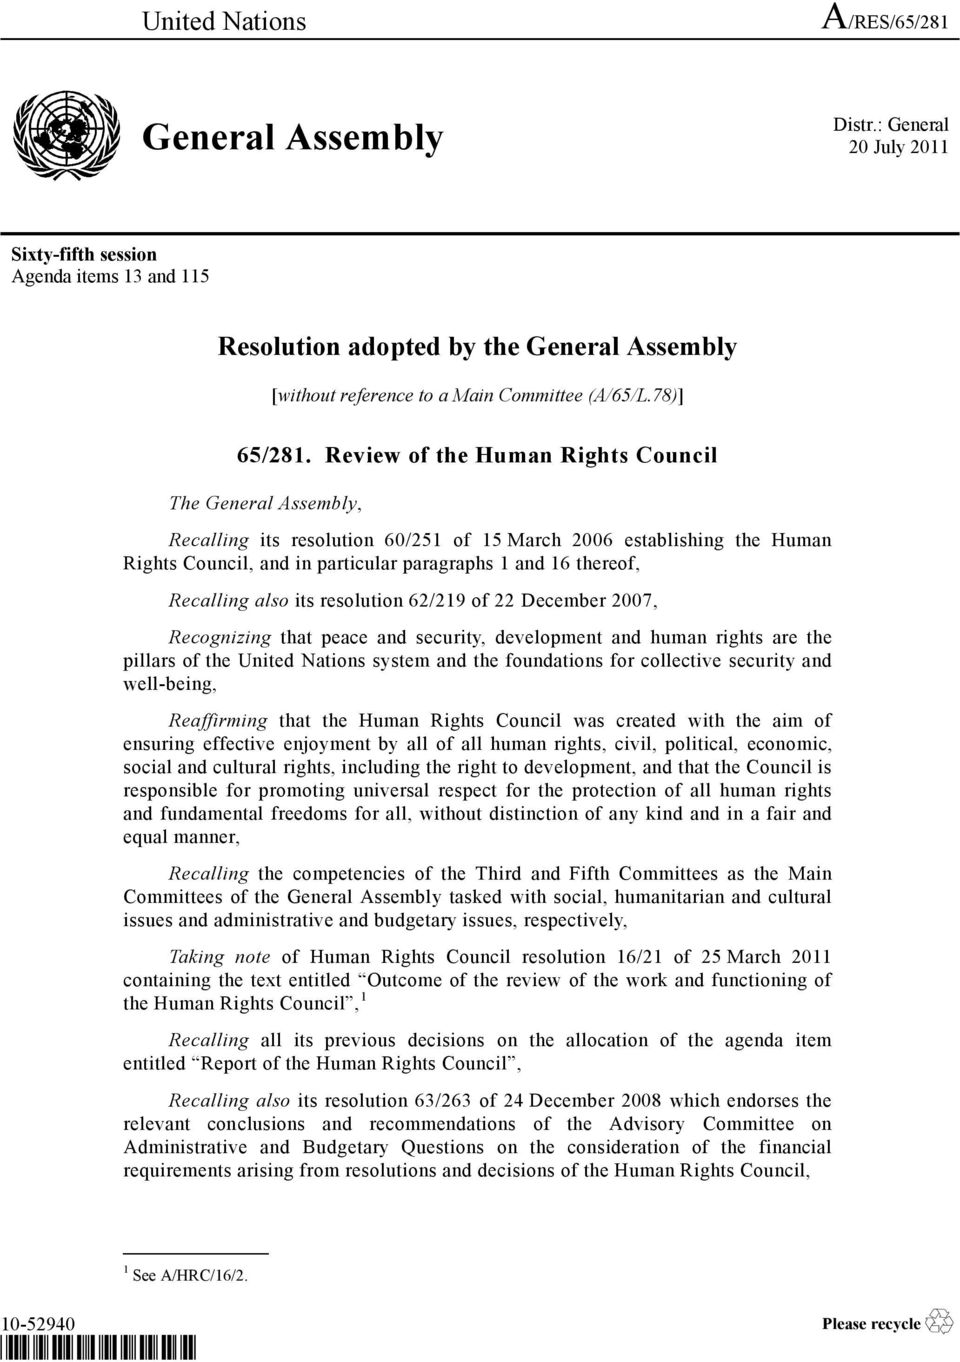 Review of the Human Rights Council The General Assembly, Recalling its resolution 60/251 of 15 March 2006 establishing the Human Rights Council, and in particular paragraphs 1 and 16 thereof,